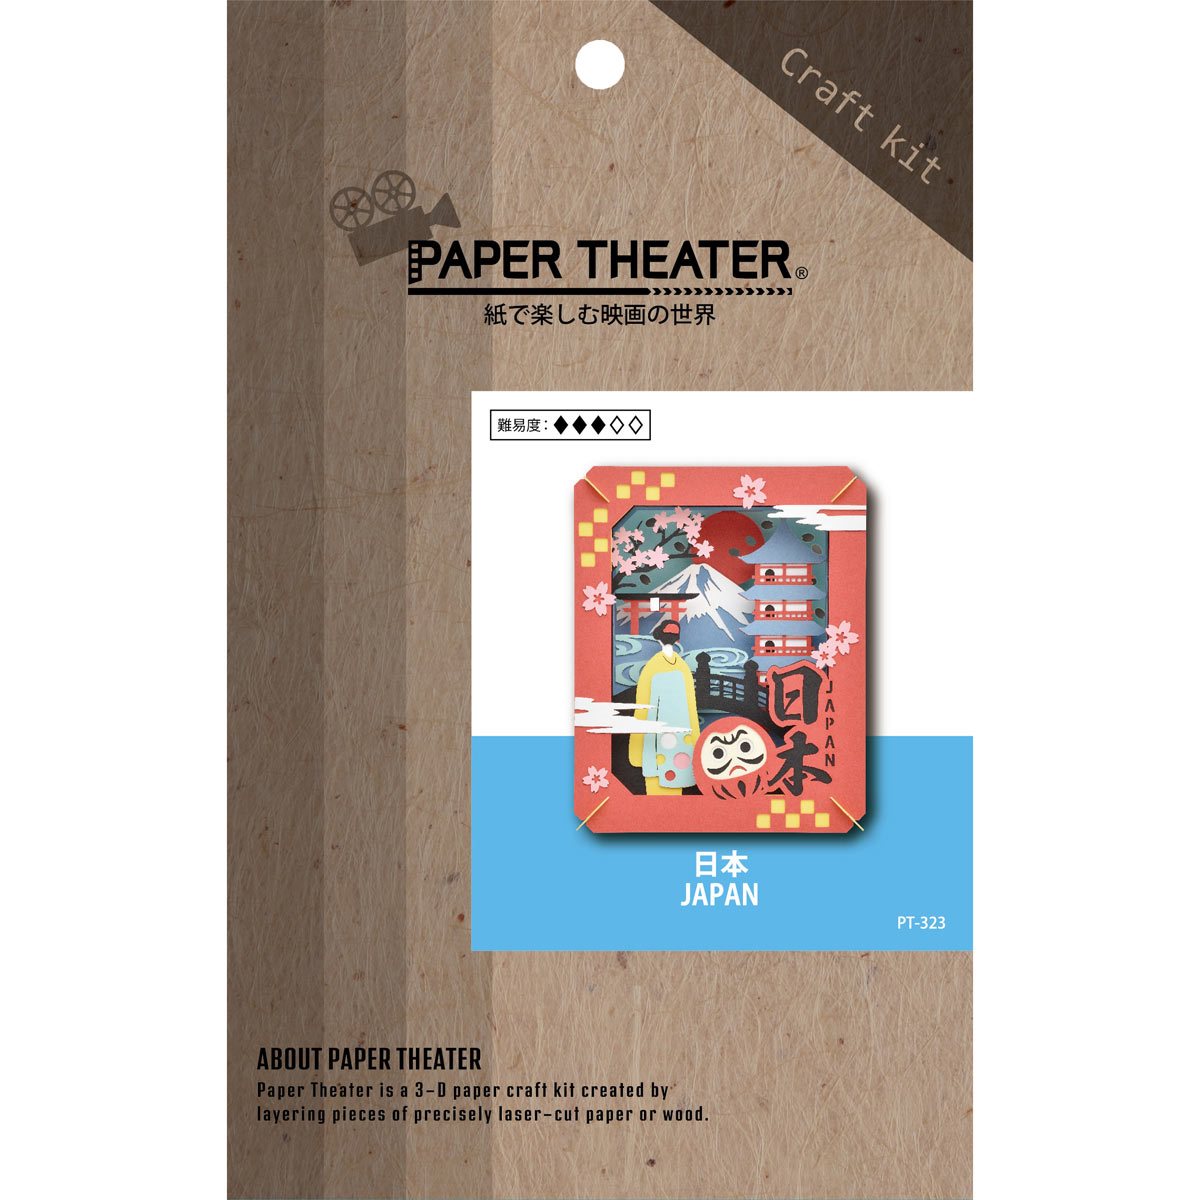 Japan PT-323 Paper Theater - Entertainment Earth